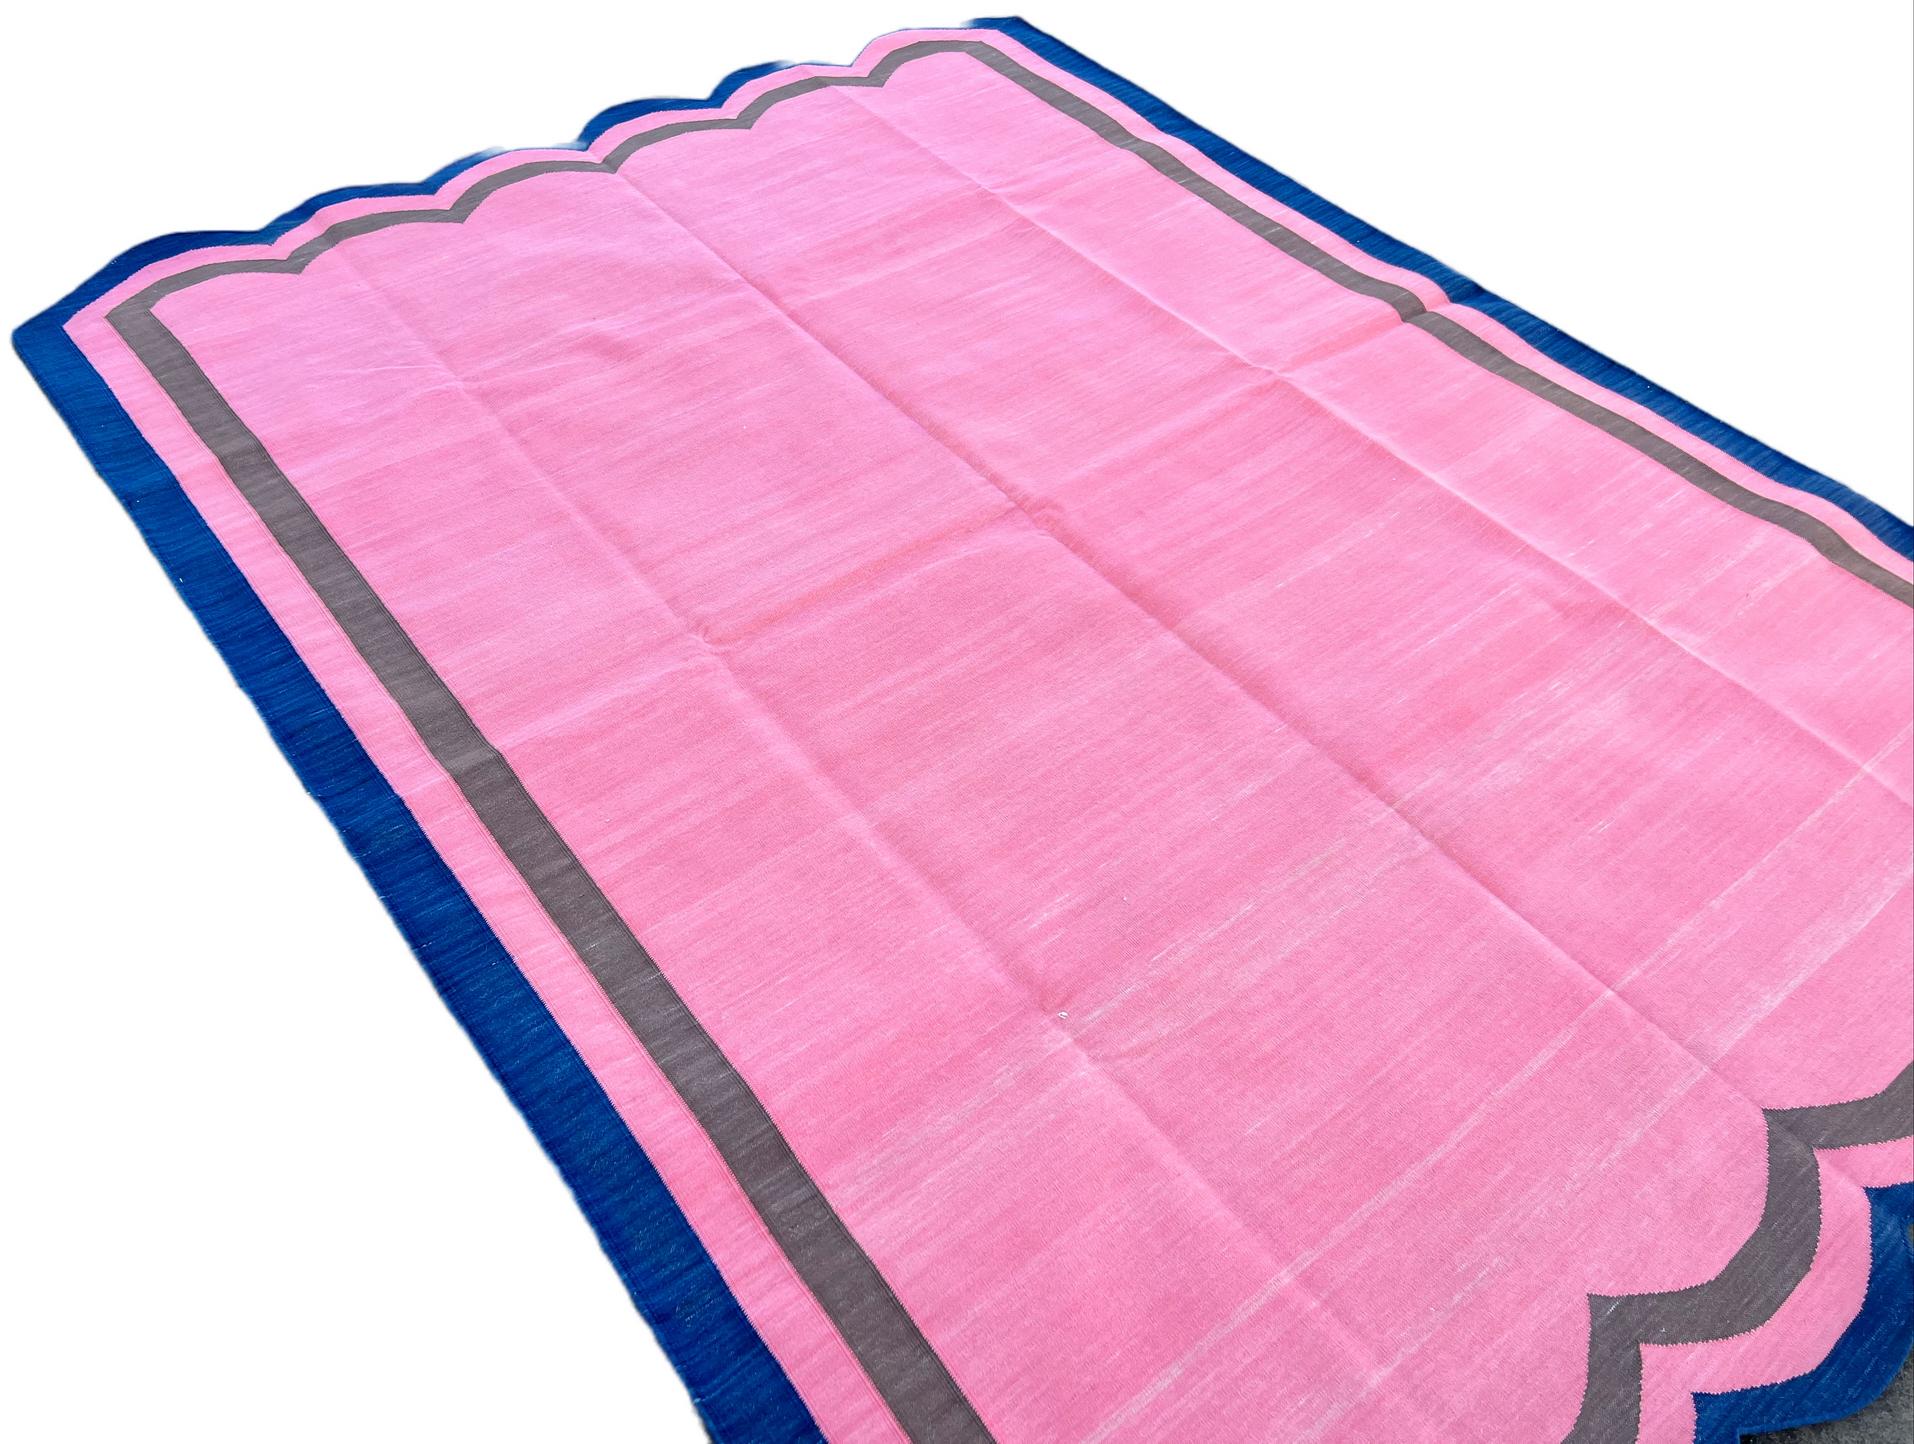 Hand-Woven Handmade Cotton Area Flat Weave Rug, 6x8 Pink And Blue Scalloped Striped Dhurrie For Sale